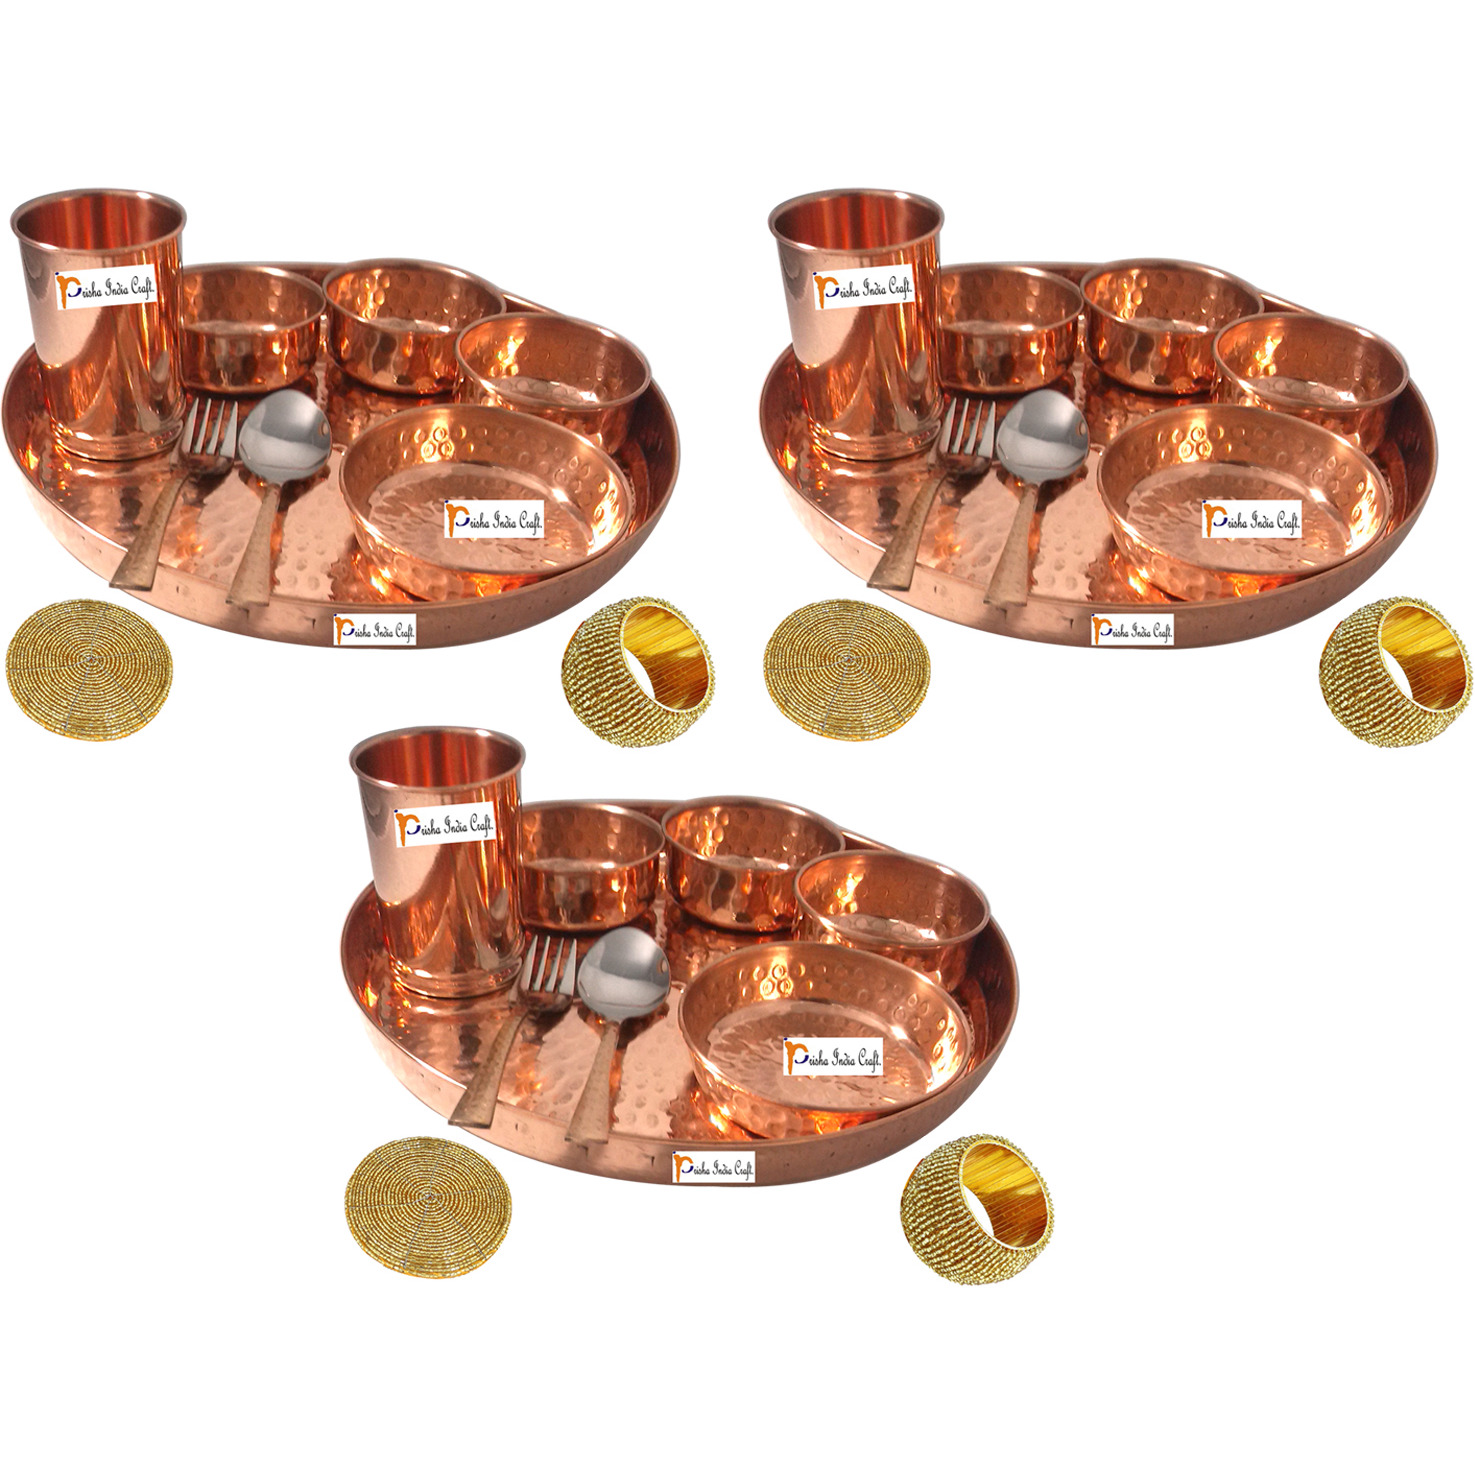 Set of 3 Prisha India Craft B. Handmade Indian Dinnerware Pure Copper Thali Set Dia 12  Traditional Dinner Set of Plate, Bowl, Spoons, Glass with Napkin ring and Coaster - Christmas Gift